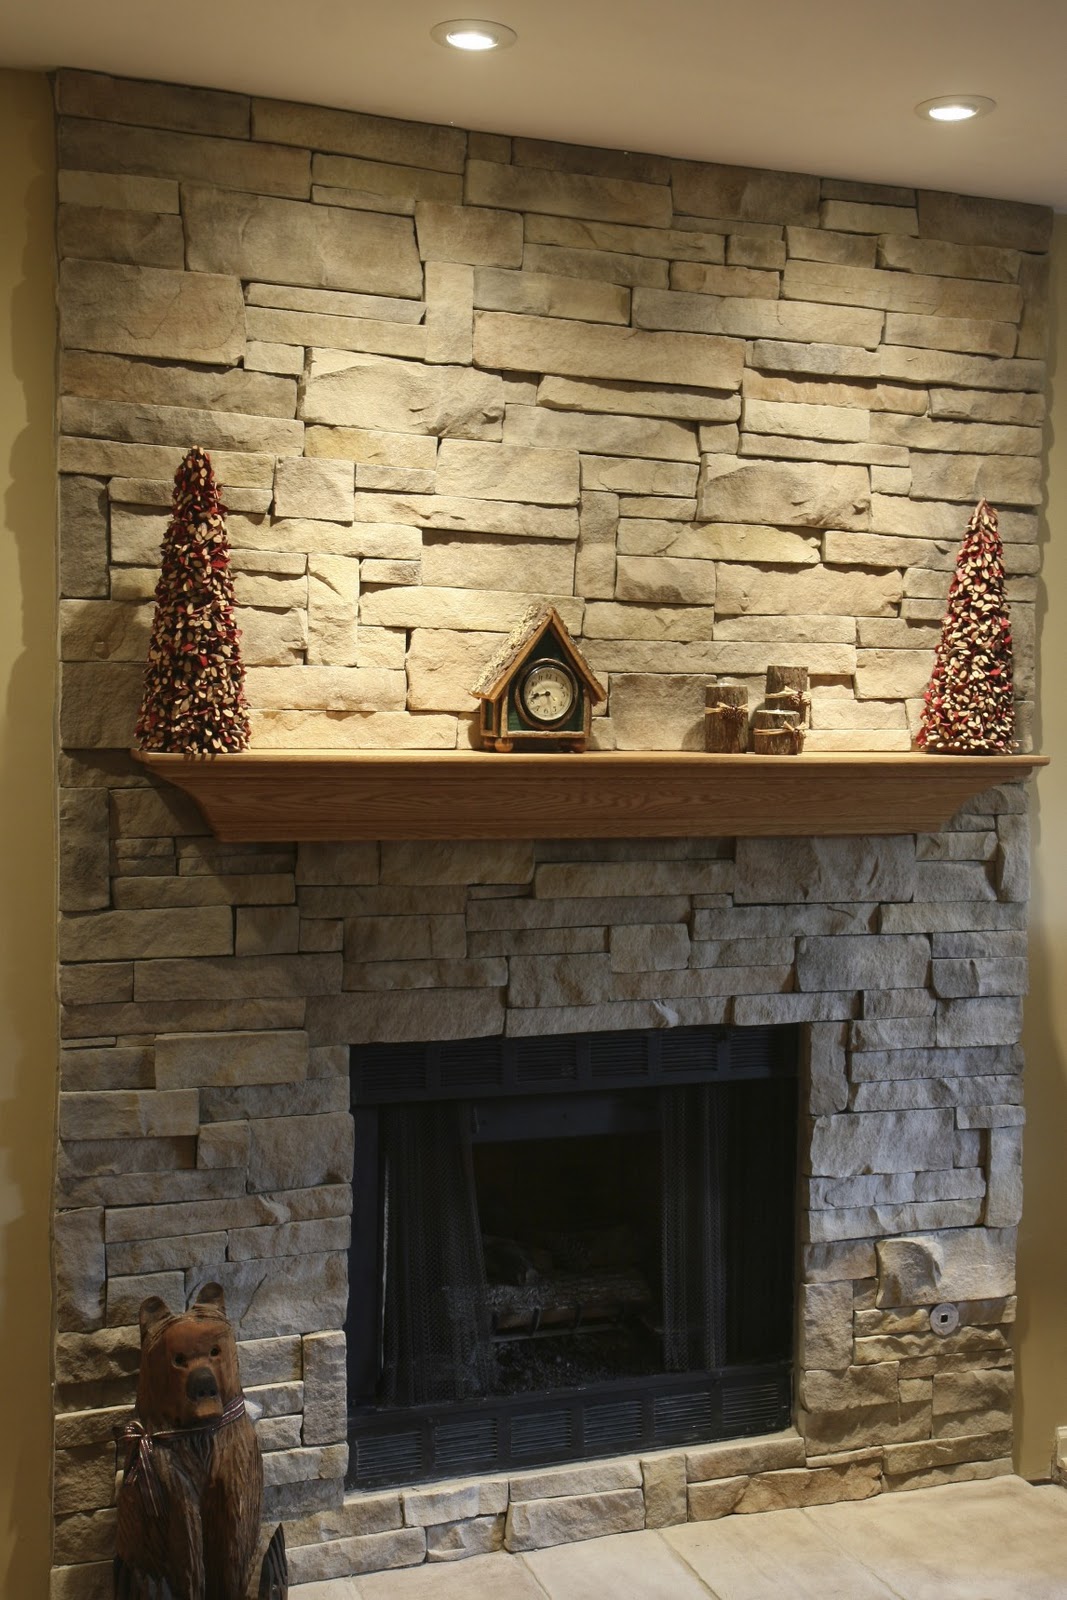 Stacked Stone For A Fireplace | Simple Home Decoration